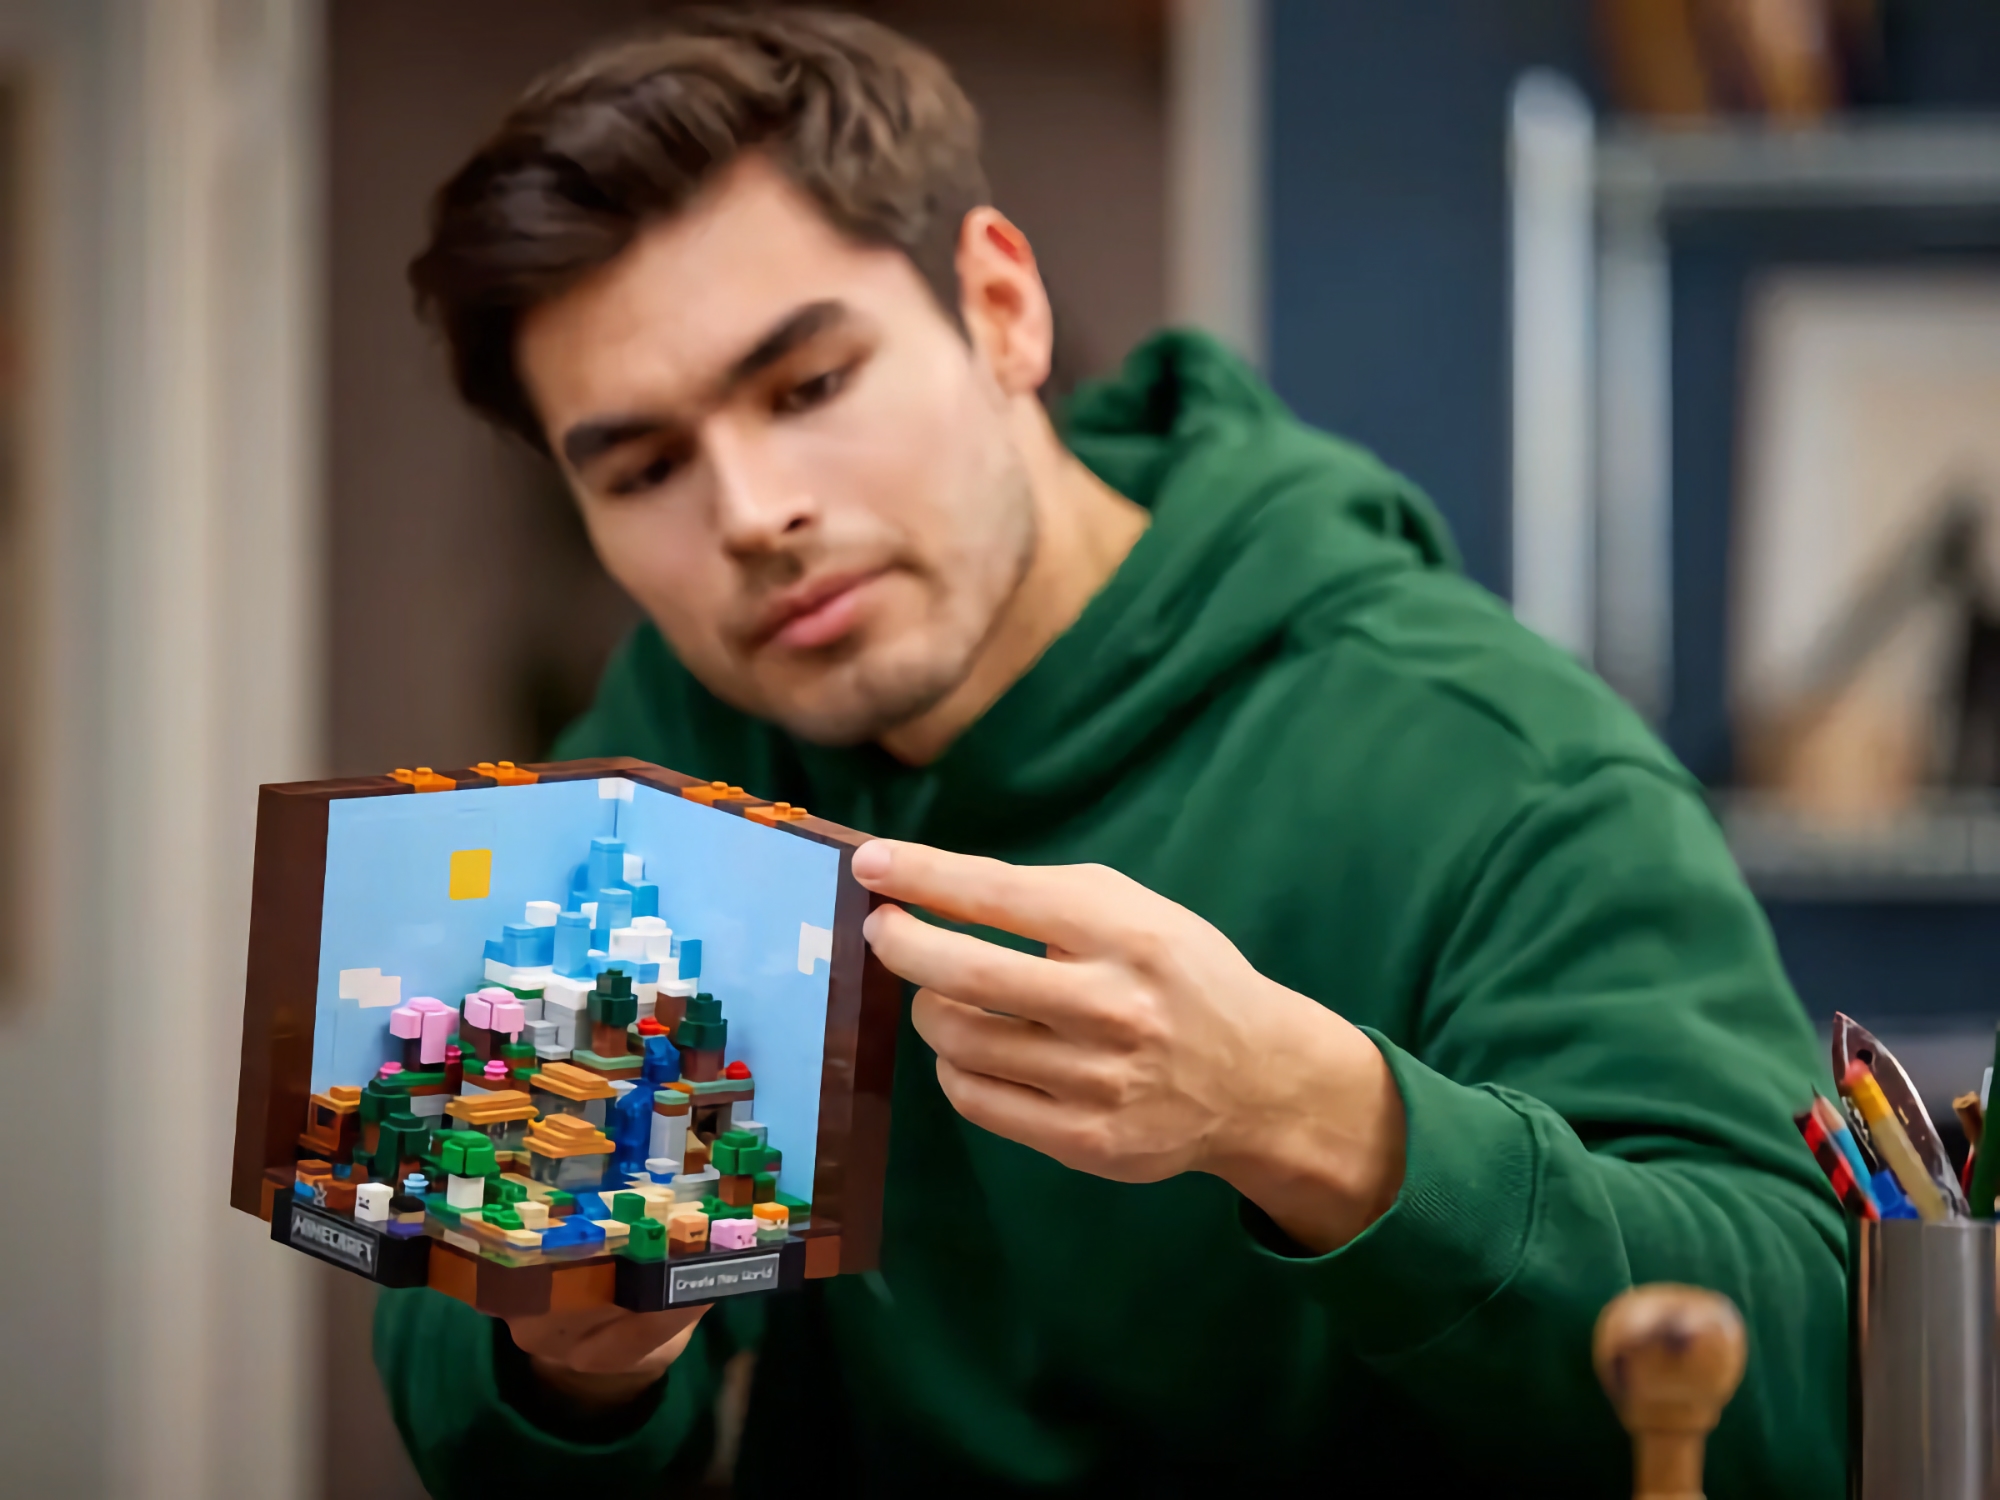 18+, 1195 parts and a price of $89: LEGO has announced the Minecraft The Crafting Table set